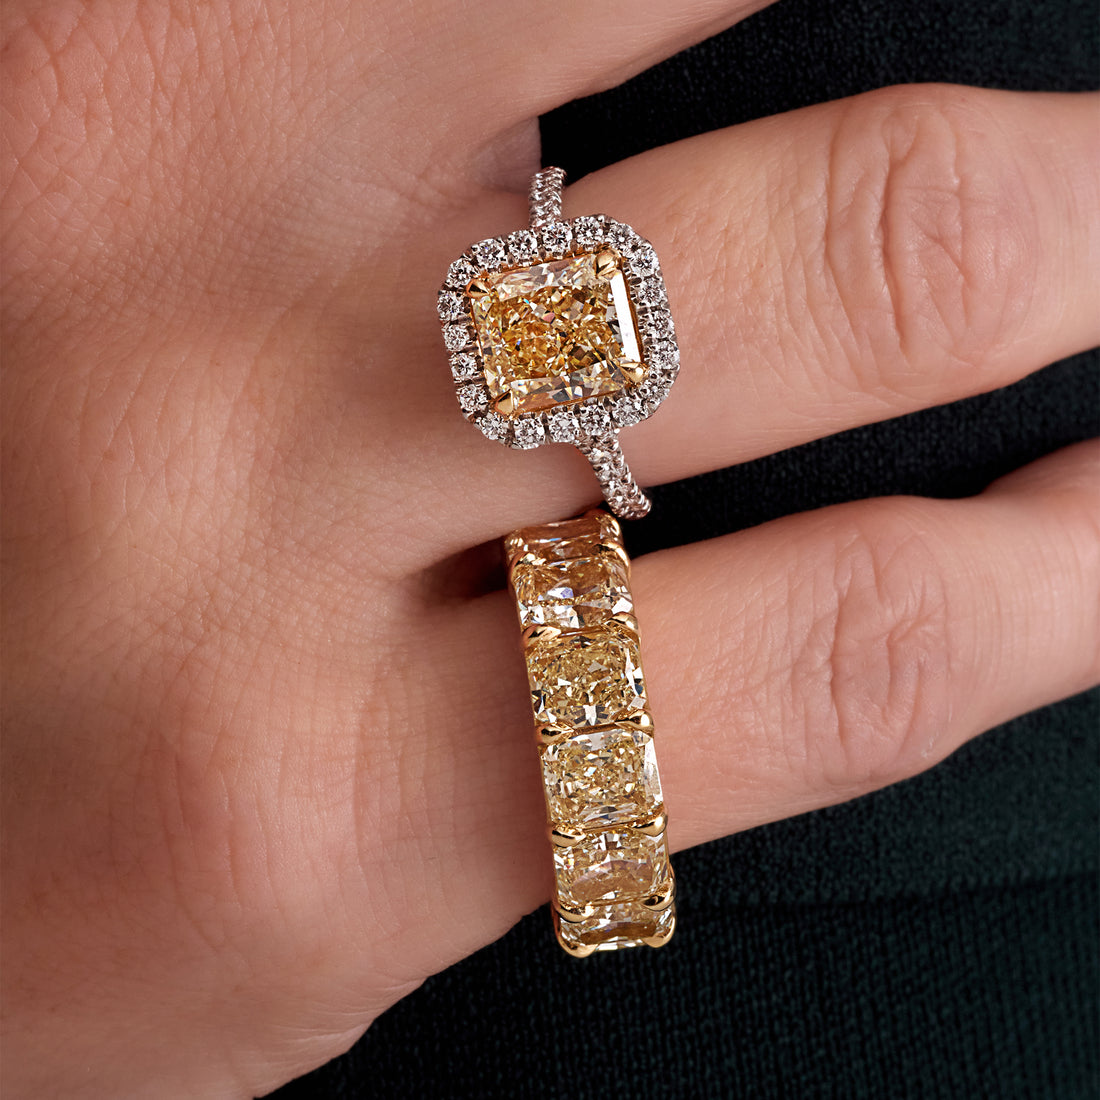 6.33 CT. Radiant Cut WX Yellow Diamond and Round Brilliant Diamond Ring in 18K Yellow Gold and Platinum